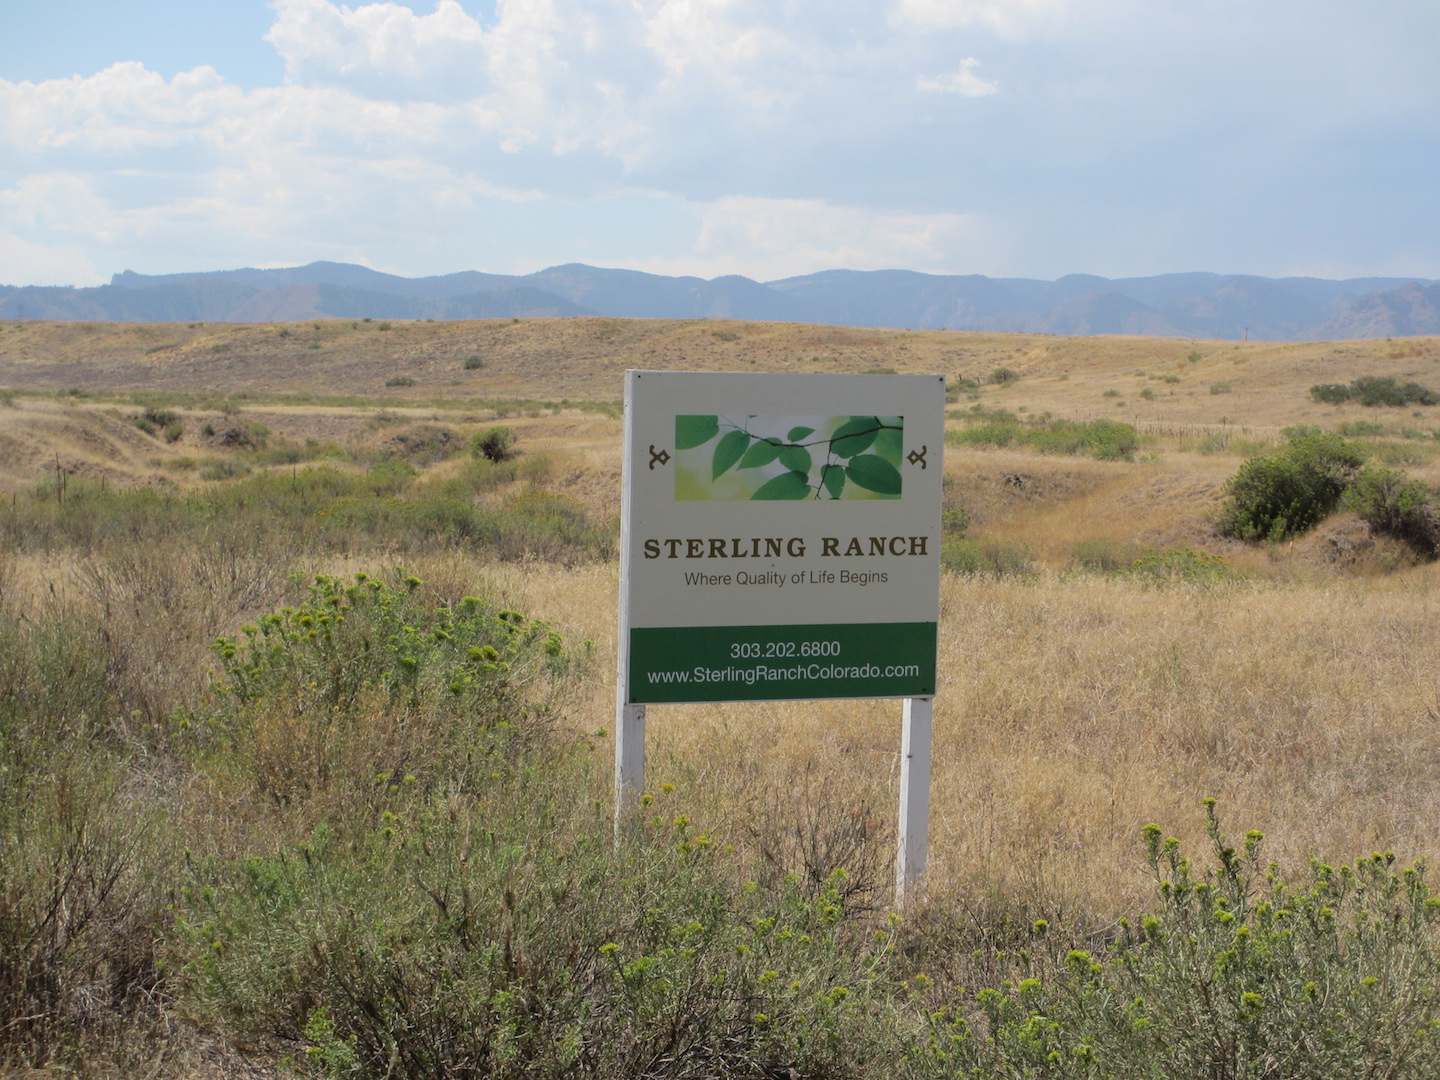 Sterling Ranch Property, August 2012 (Photograph by D. Saitta)